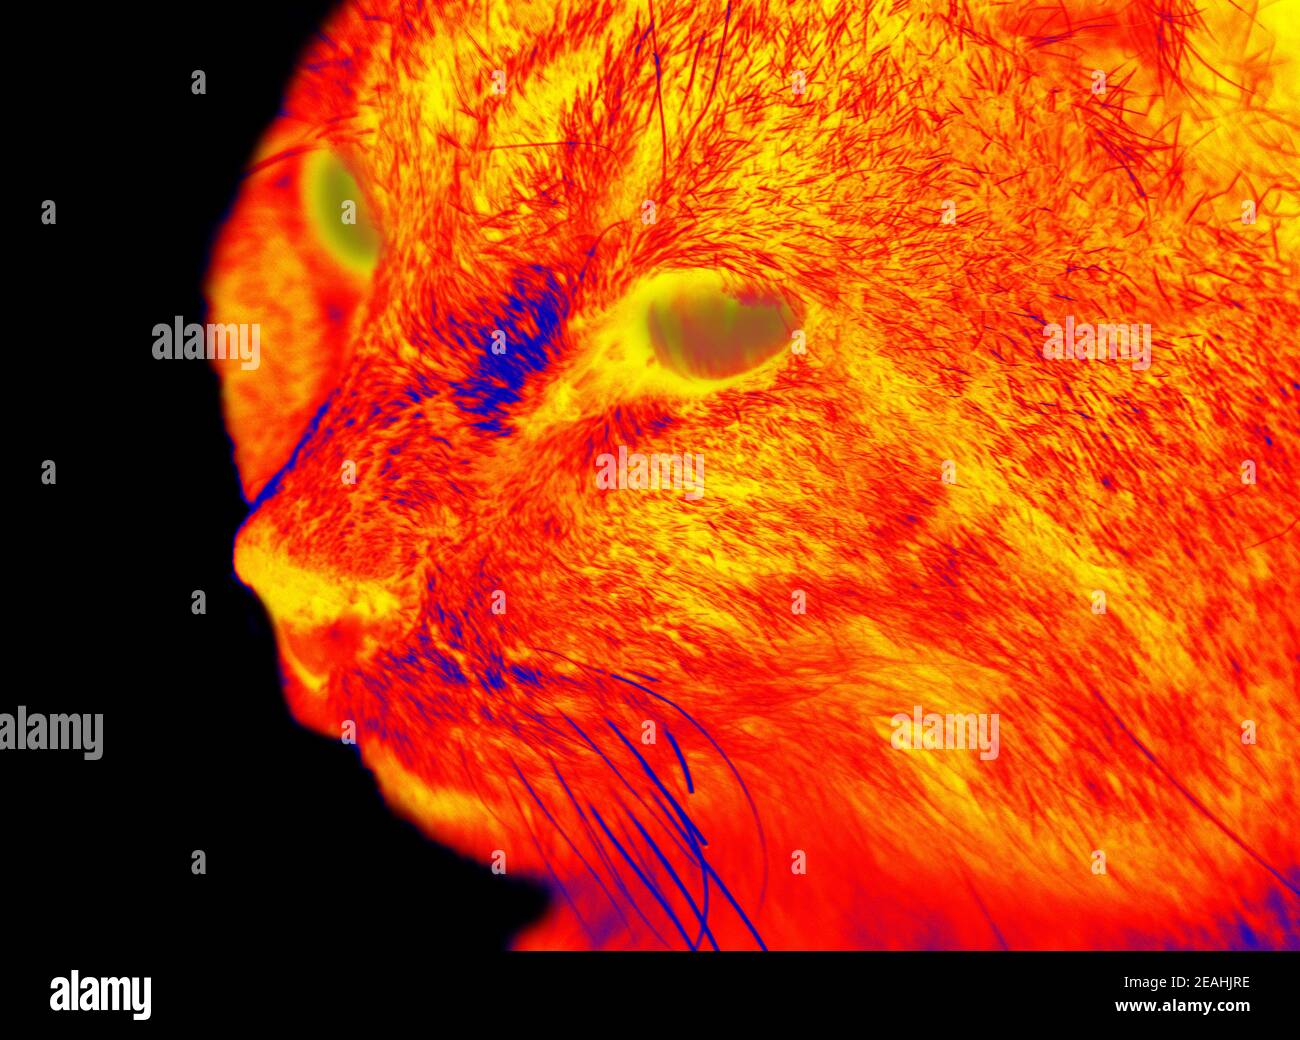 Wild stray cat in scientific high-tech thermal imager on black background isolated Stock Photo